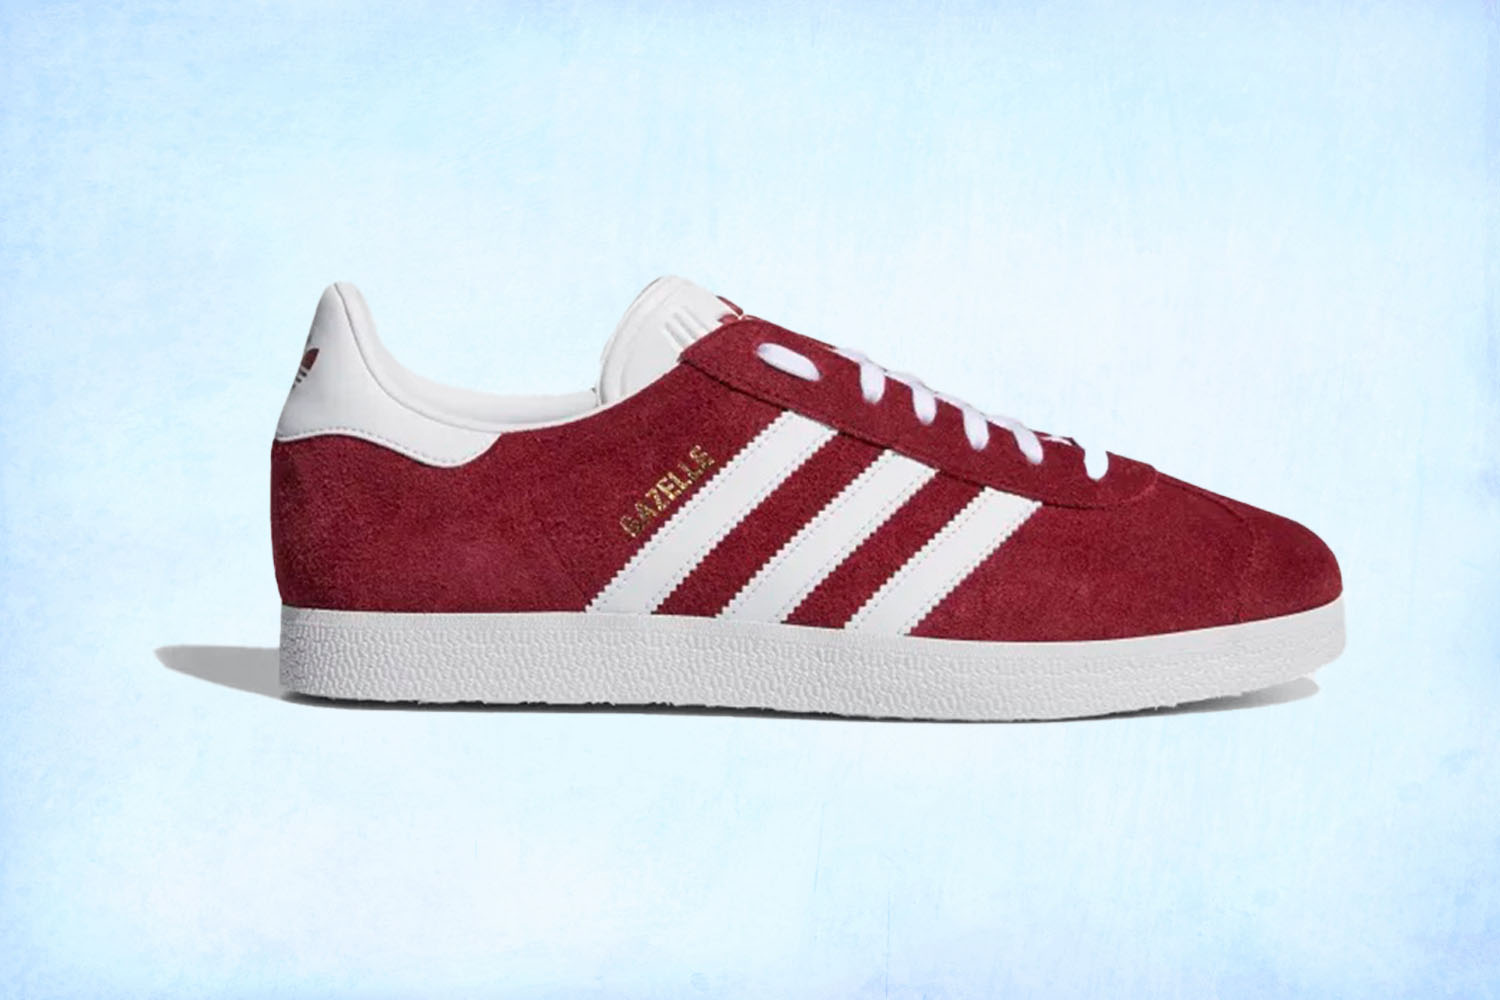 kylling plukke nød Adidas Sneakers Styles: Your Shoe Guide From Samba to Superstar - InsideHook